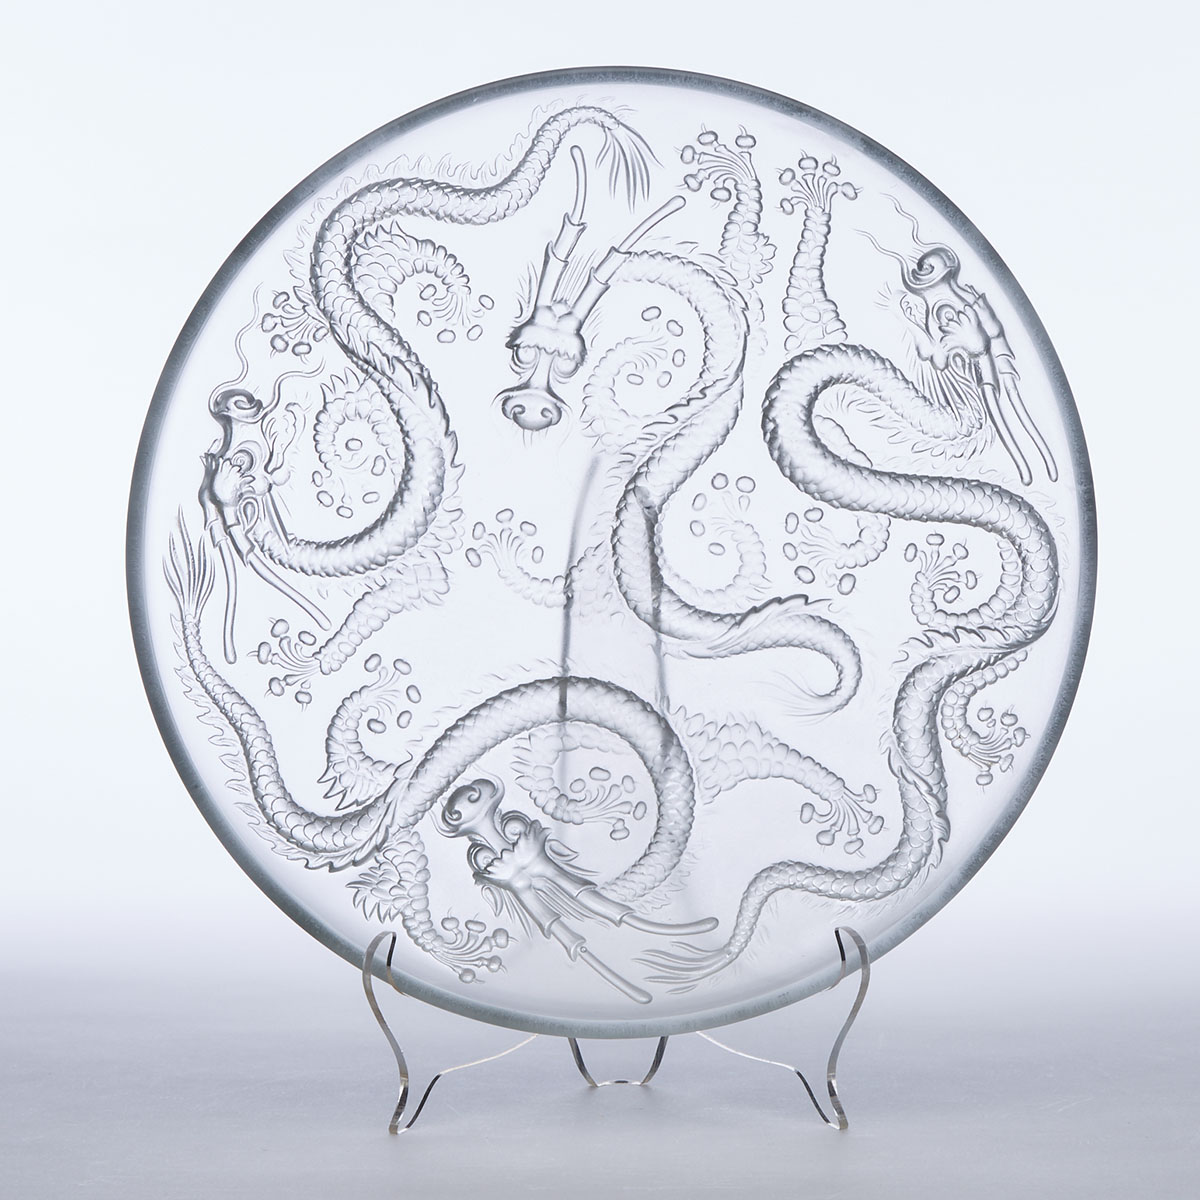 Moulded and Frosted Glass 'Dragons' Shallow Bowl, probably Barolac, 1930s